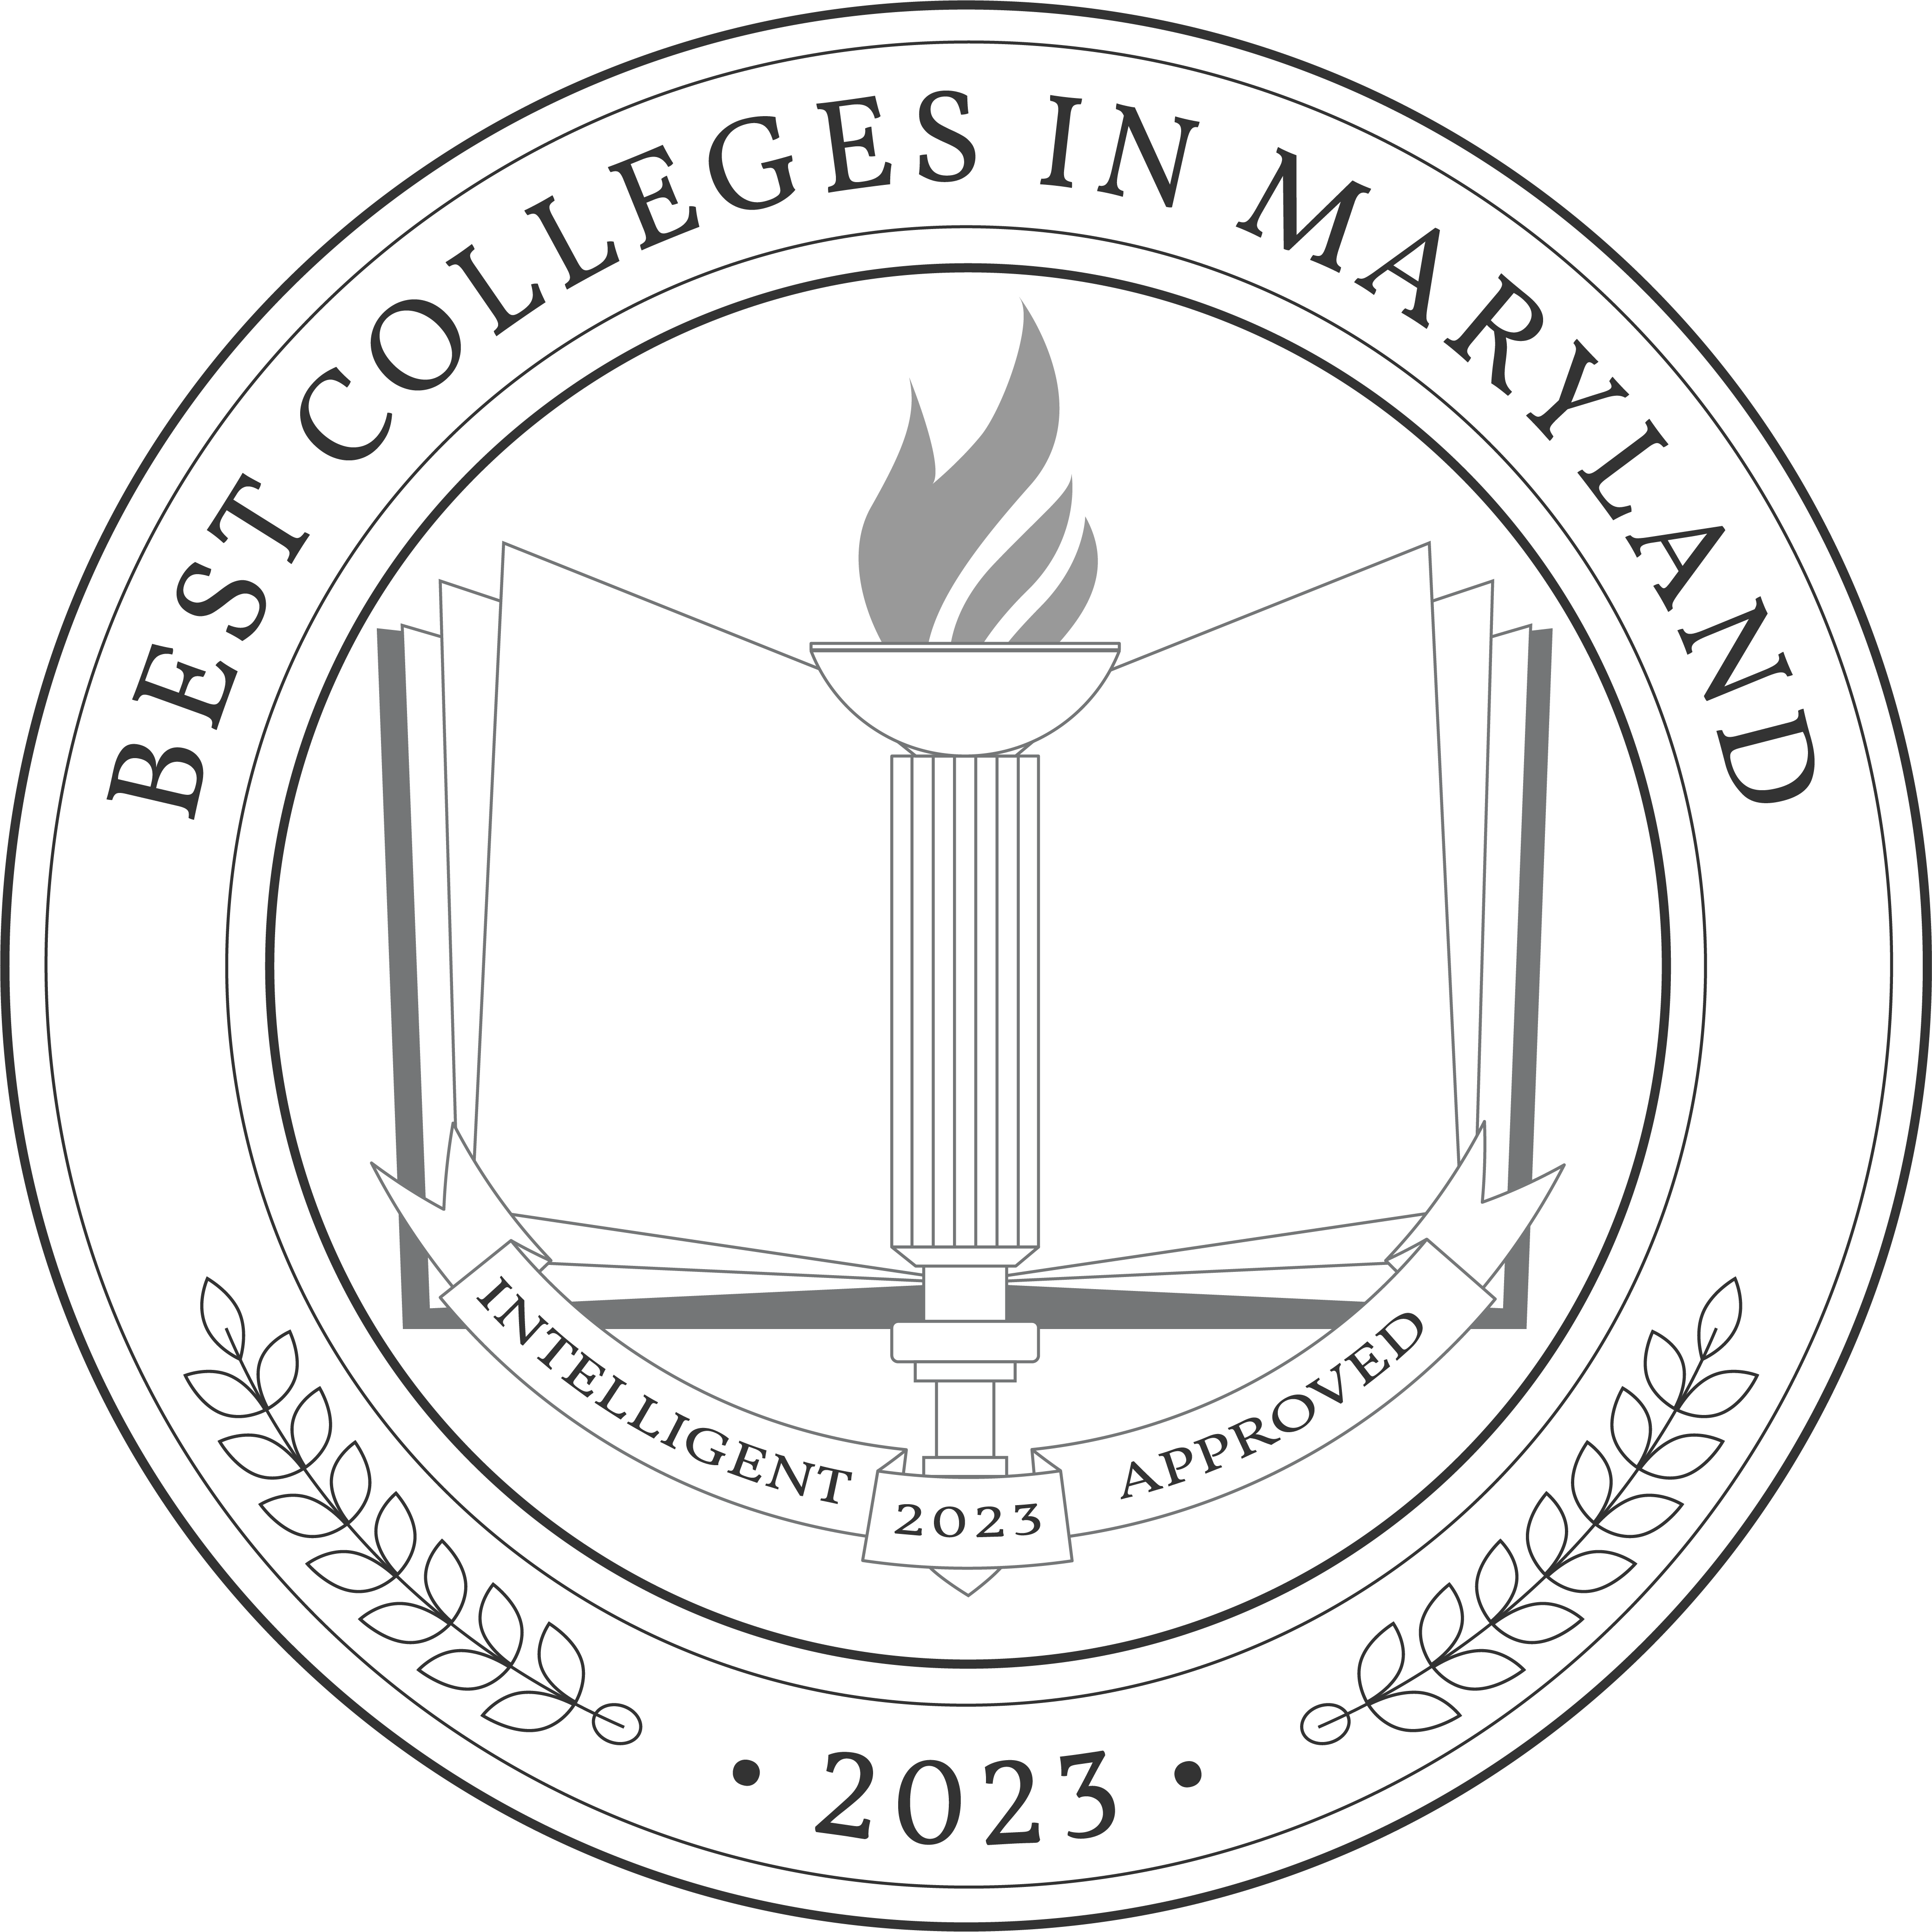 Best Colleges in Maryland 2023 Badge